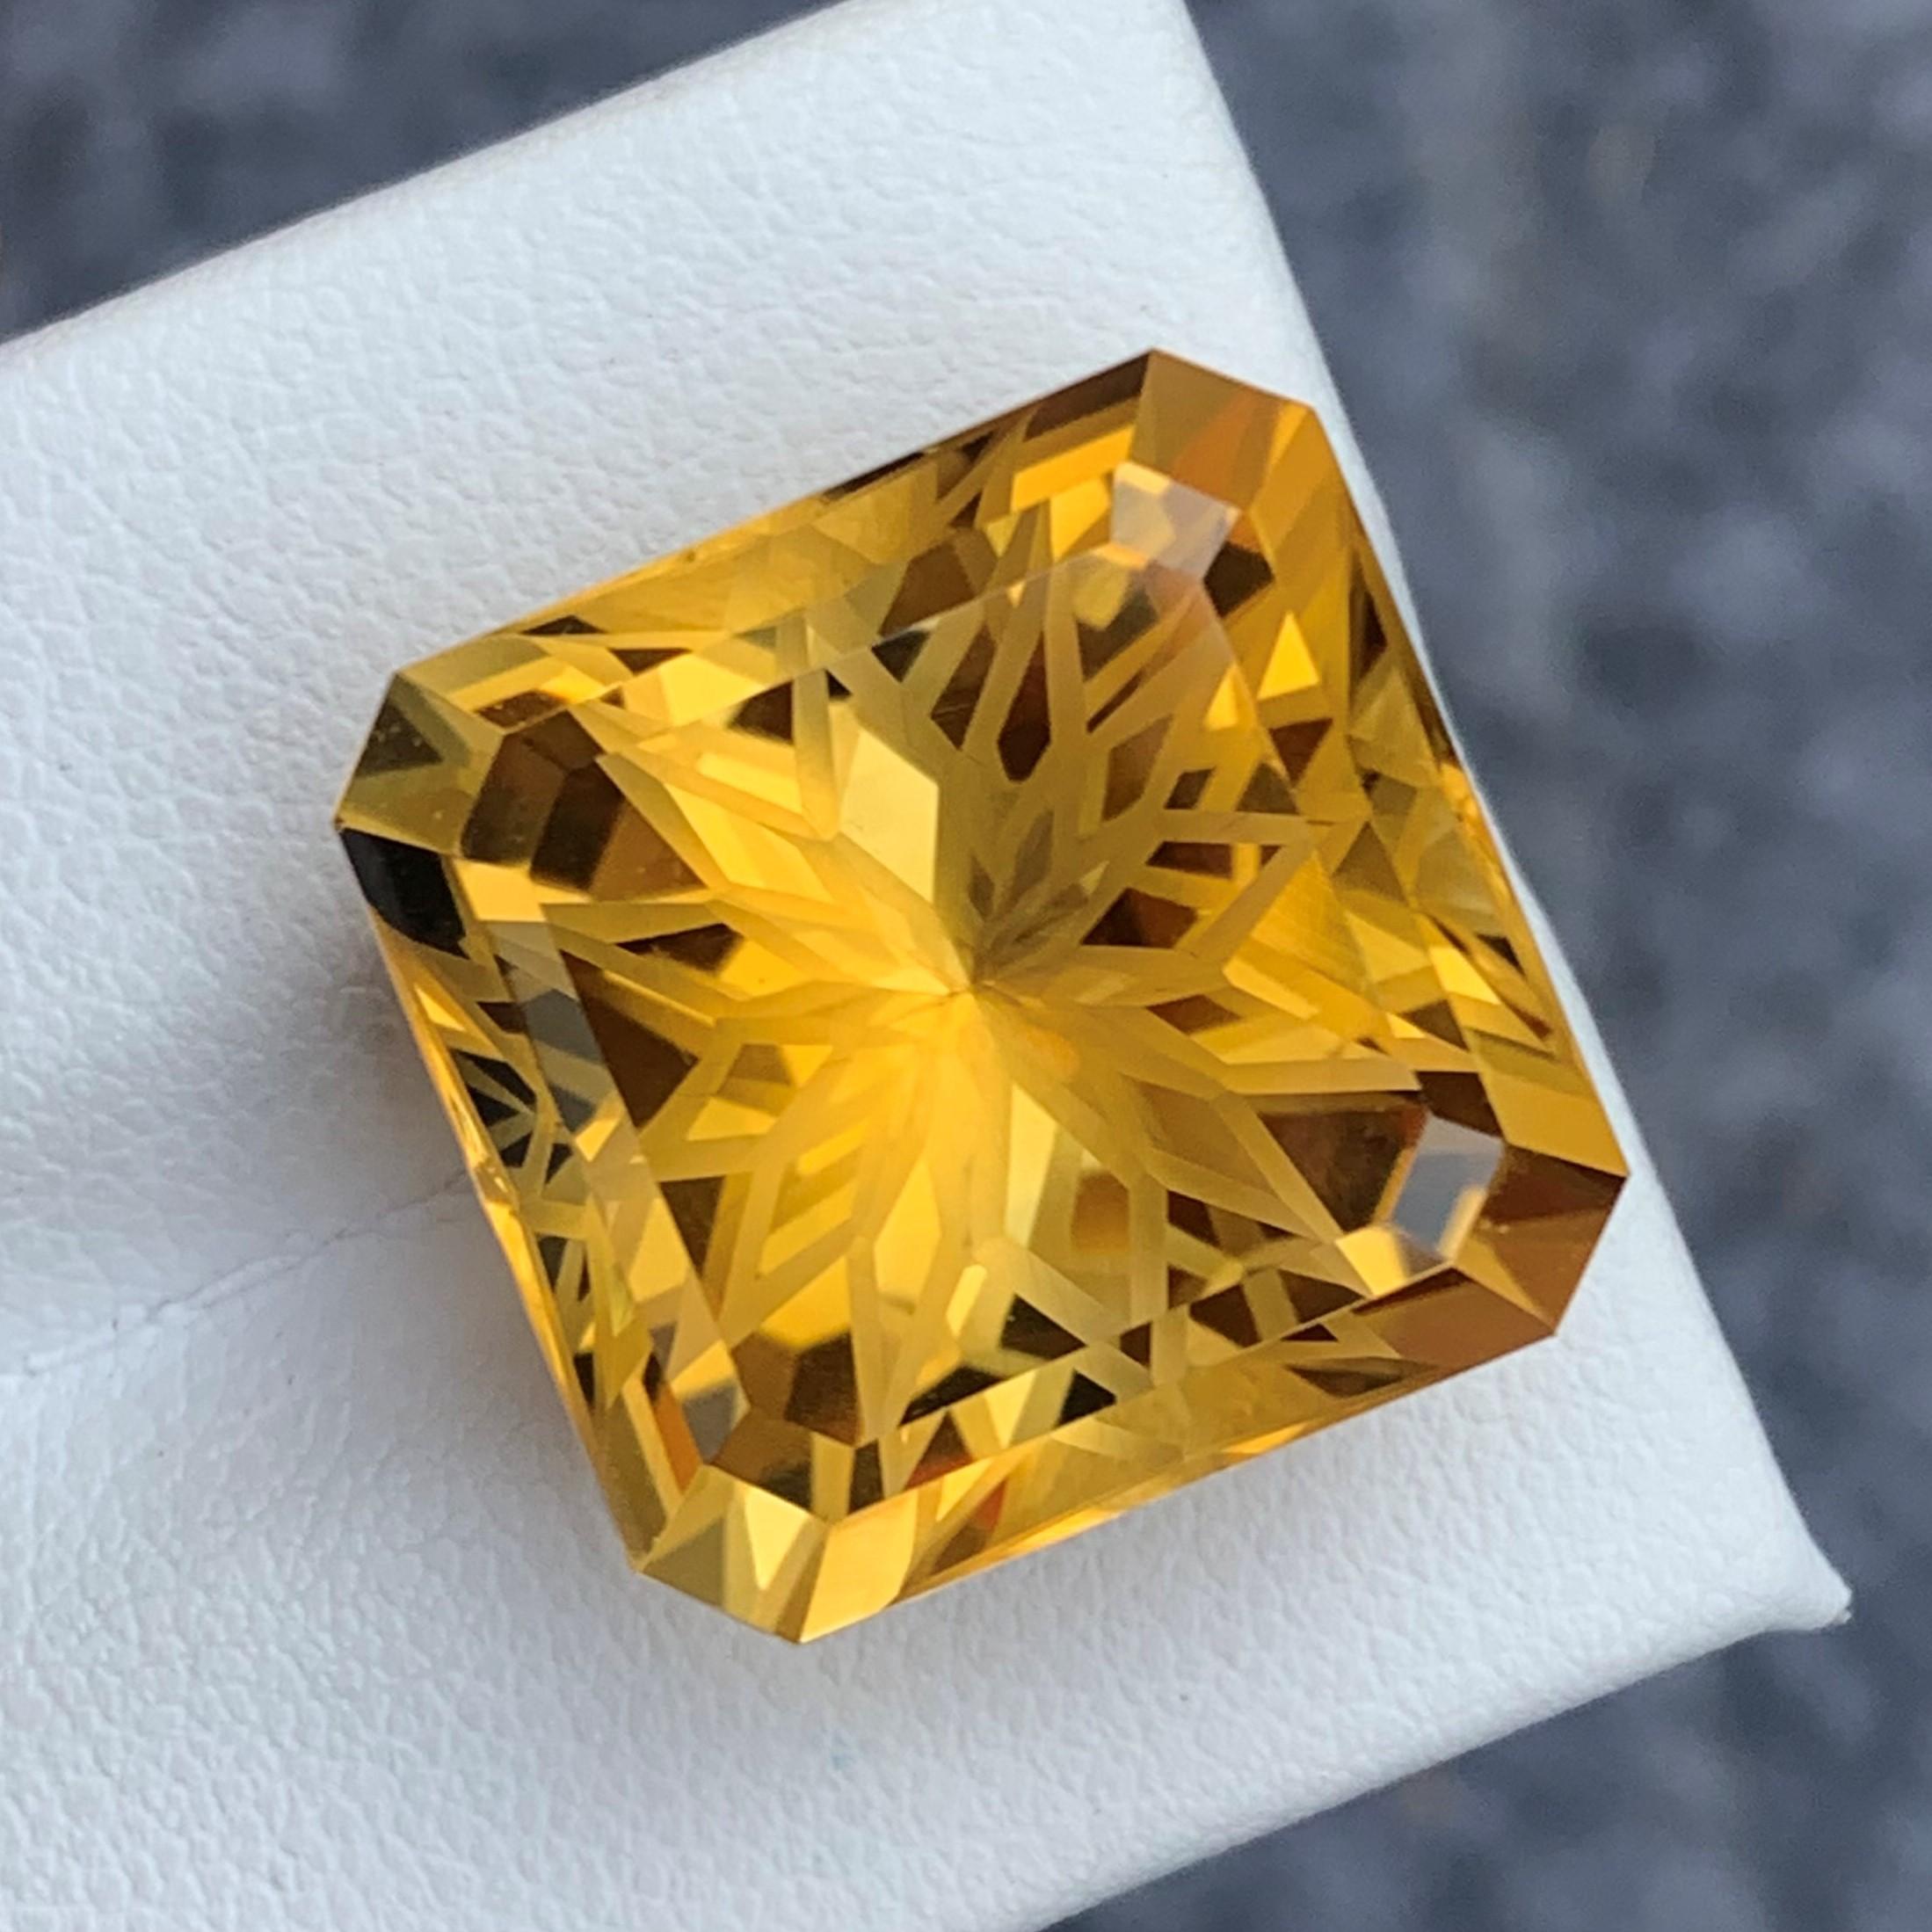 Gemstone Type : Citrine
Weight : 27.75 Carats
Dimensions : 18x17.9x13.4 mm
Clarity : Loupe Clean
Origin : Brazil
Color: Yellow
Shape: Square
Cut: Flower
Certificate: On Demand
Month: November
.
The Many Healing Properties of Citrine
Increase